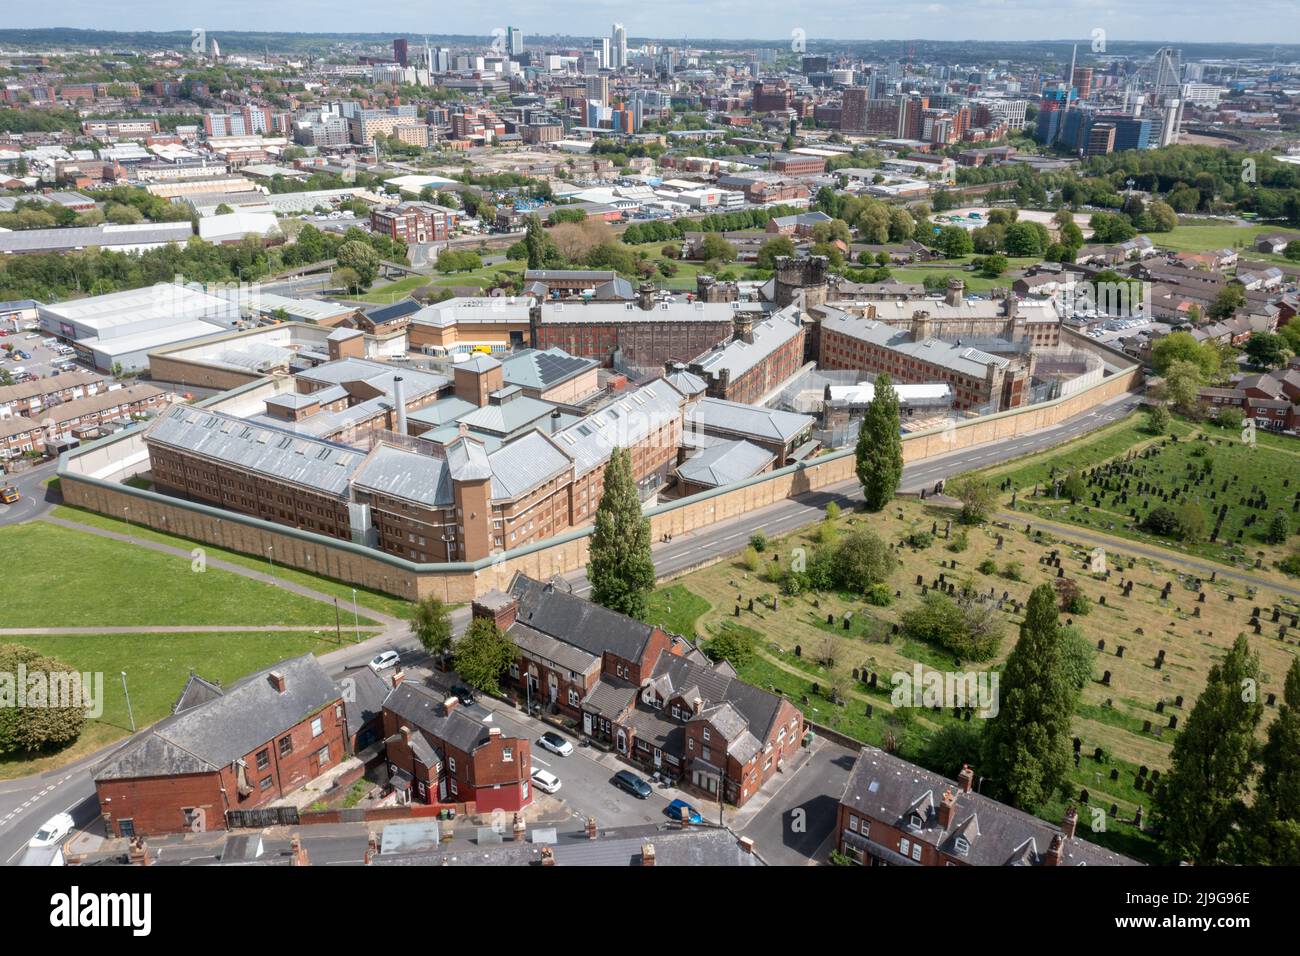 Aerial drone photo of the town of Armley in Leeds West Yorkshire in the UK, showing the famous HM Prison Leeds, or Armley Prison, showing the Jail wal Stock Photo